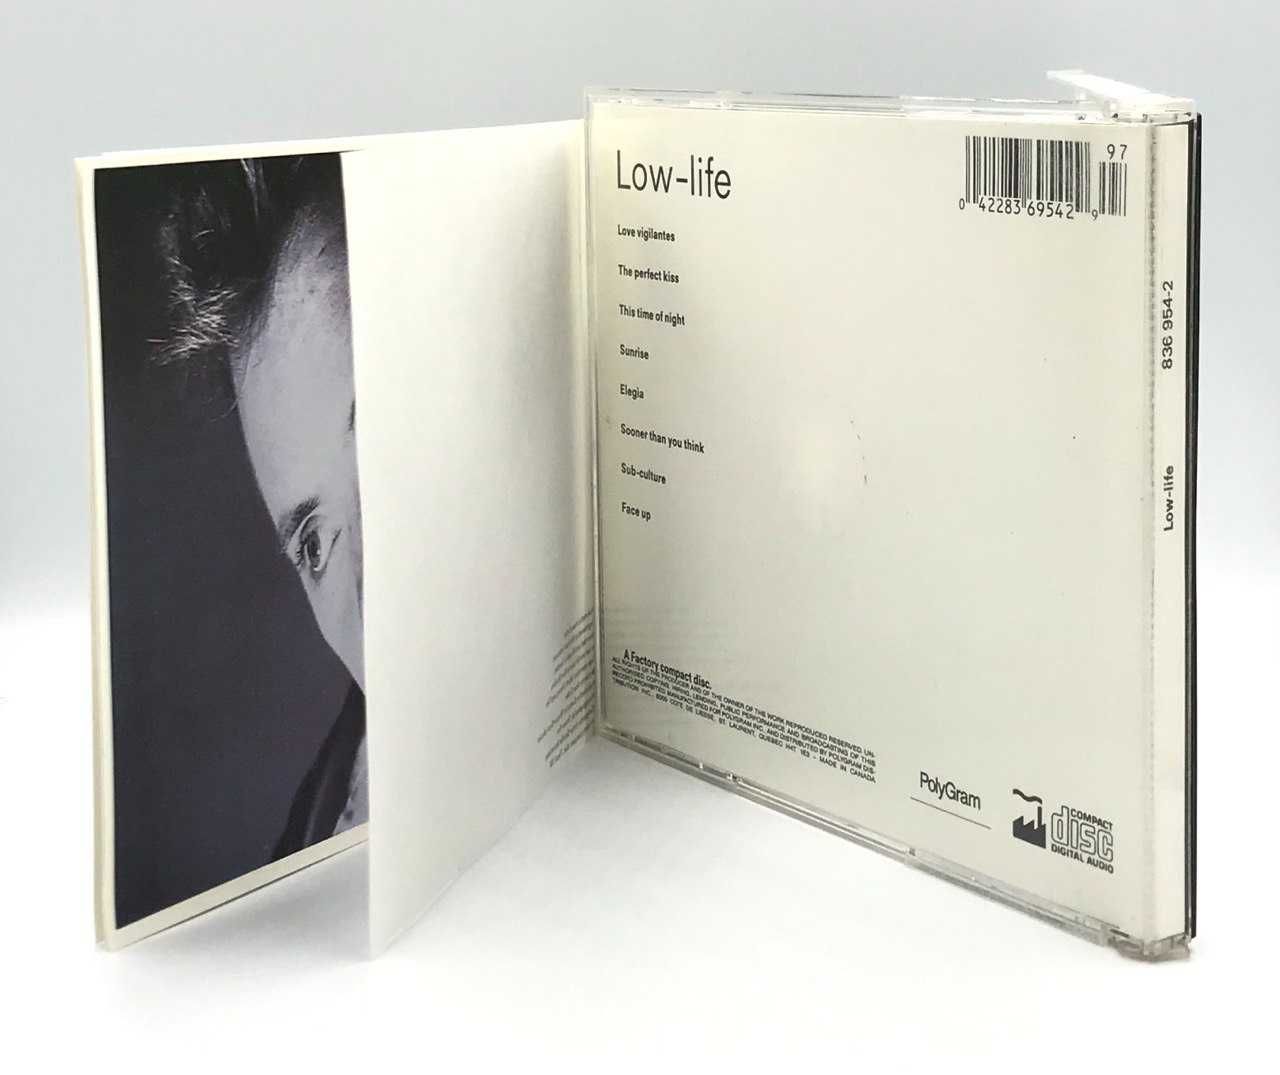 New Order – Low-life (1985, Canada)